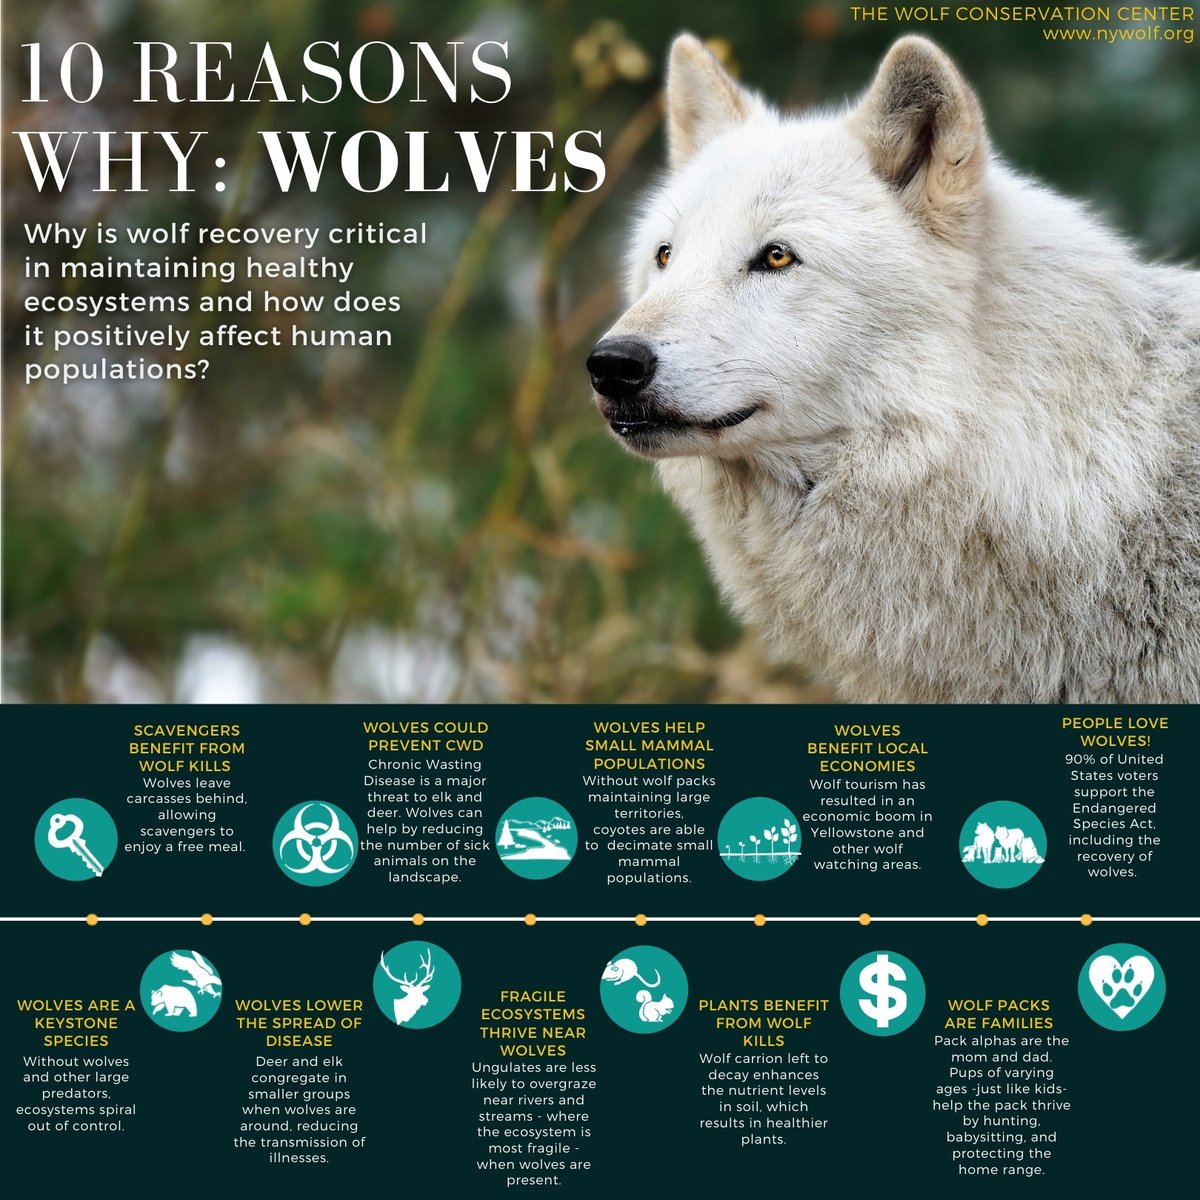 10 reasons to protect wolves 🐺 #RelistWolves